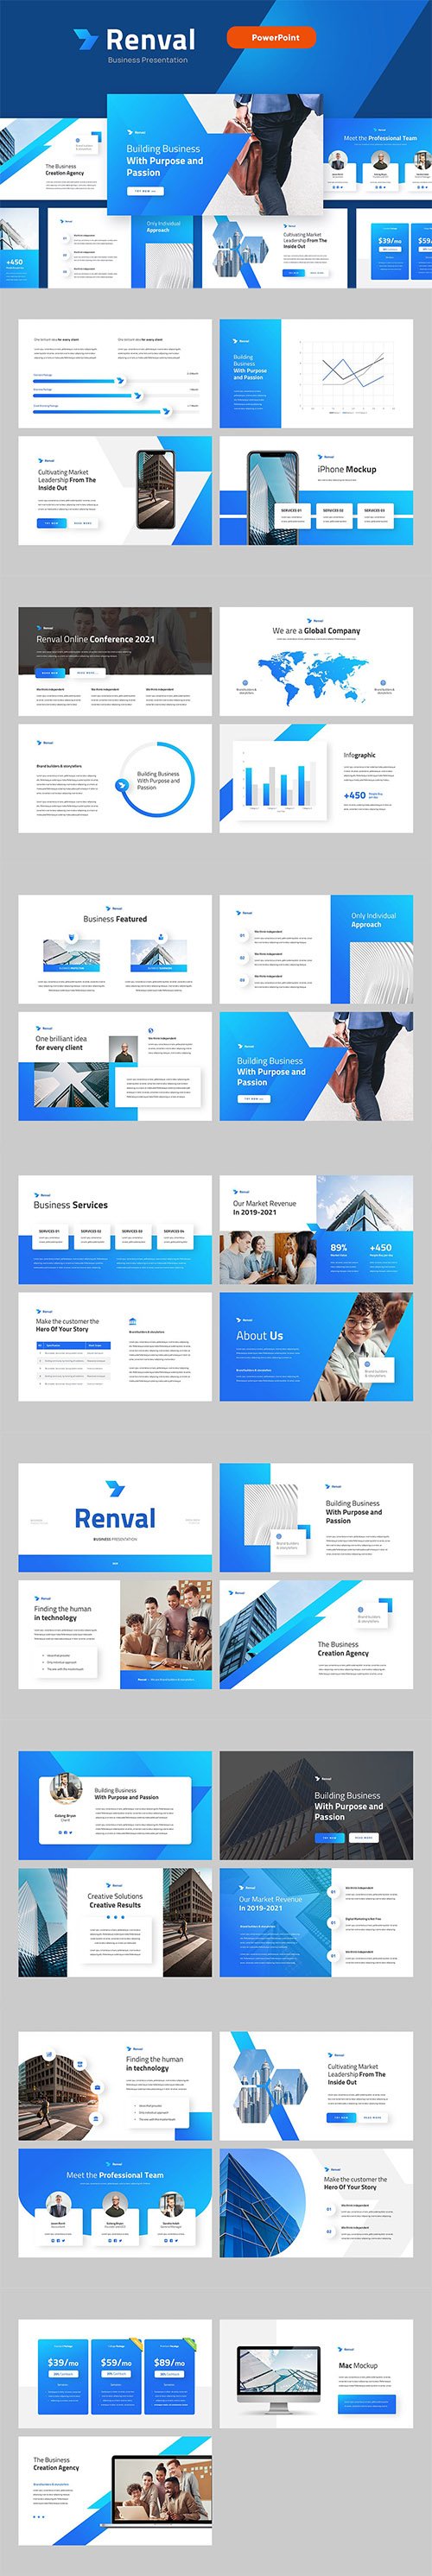 RENVAL - Business Marketing Powerpoint Template